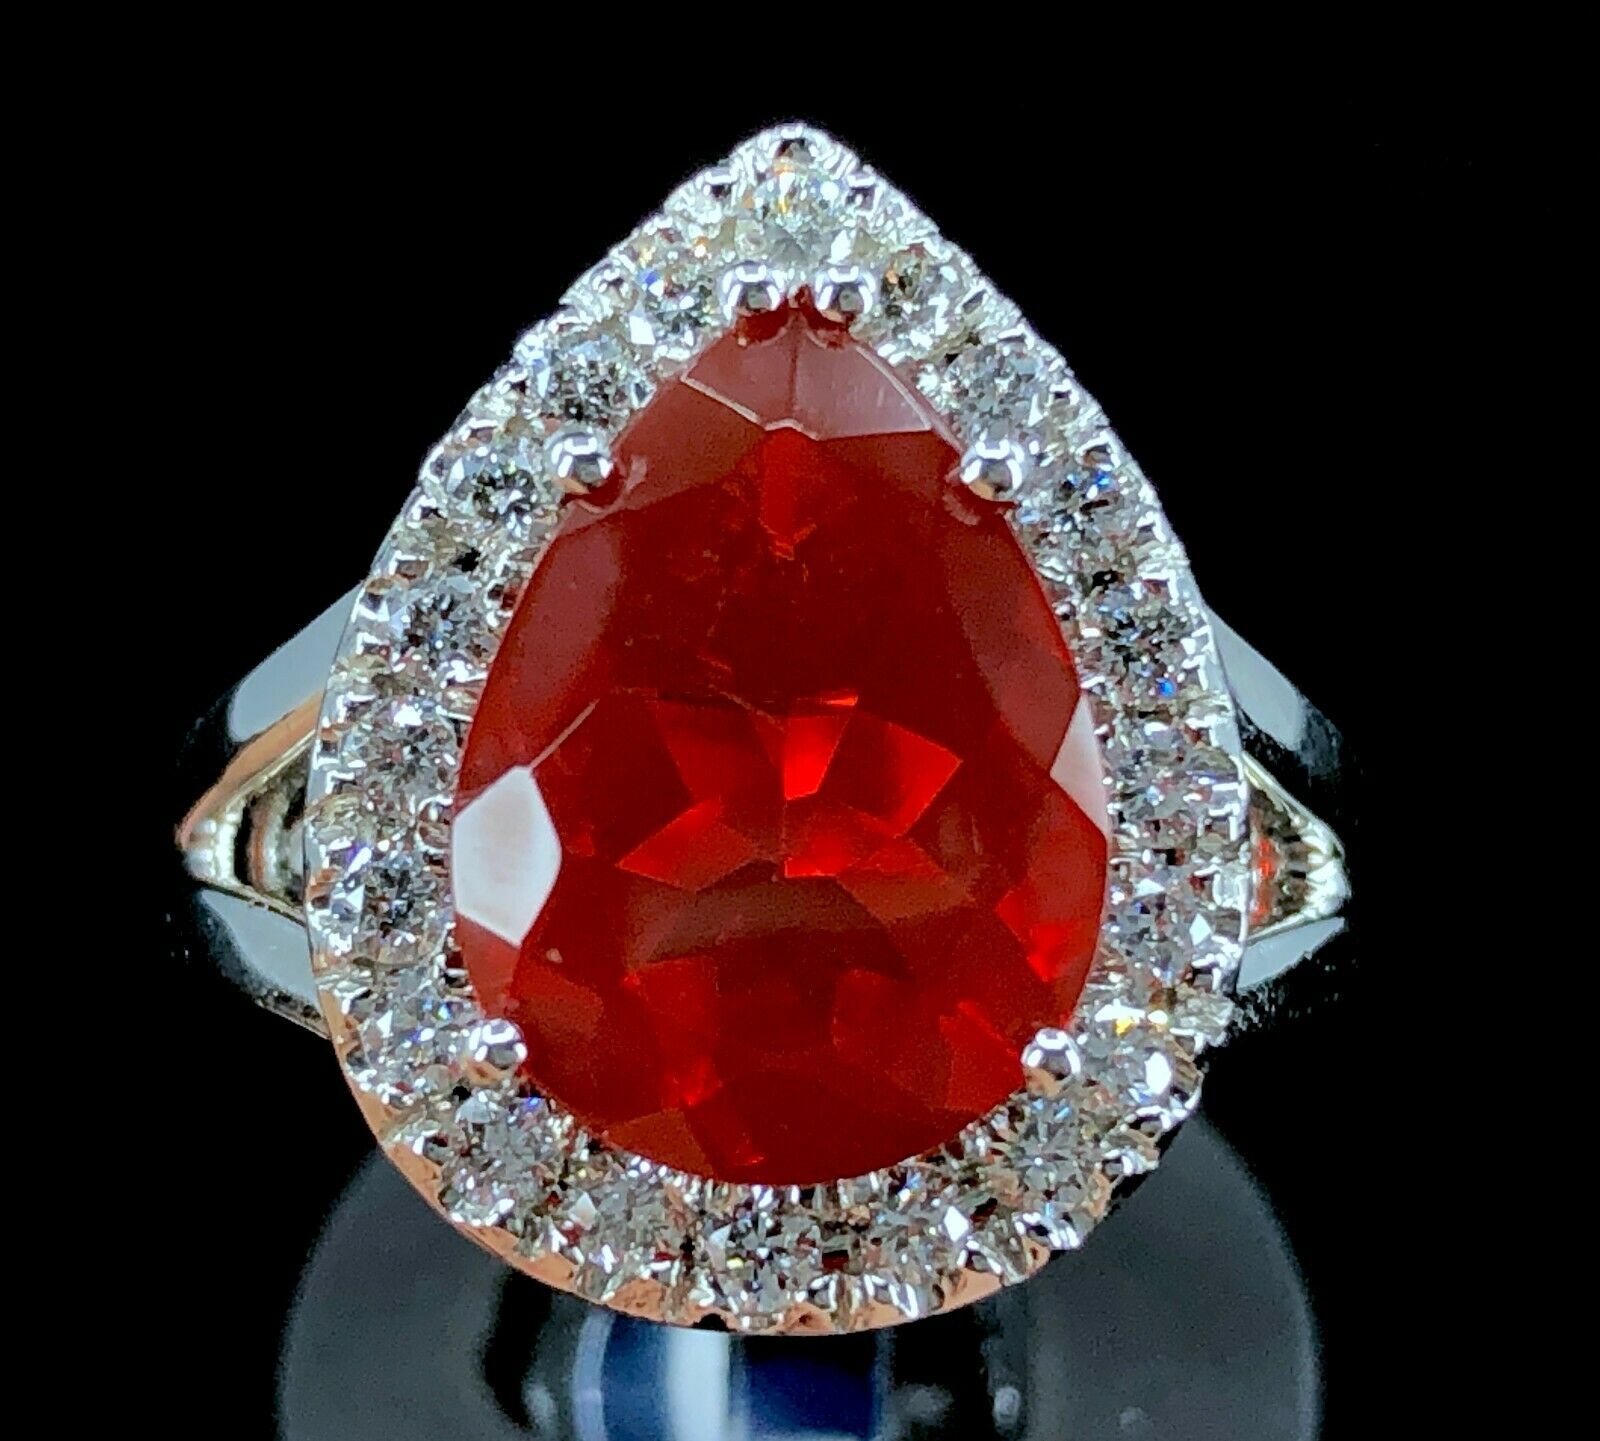 GIA 3.19 ct. Red Fire Opal & Diamond Ring in Platinum